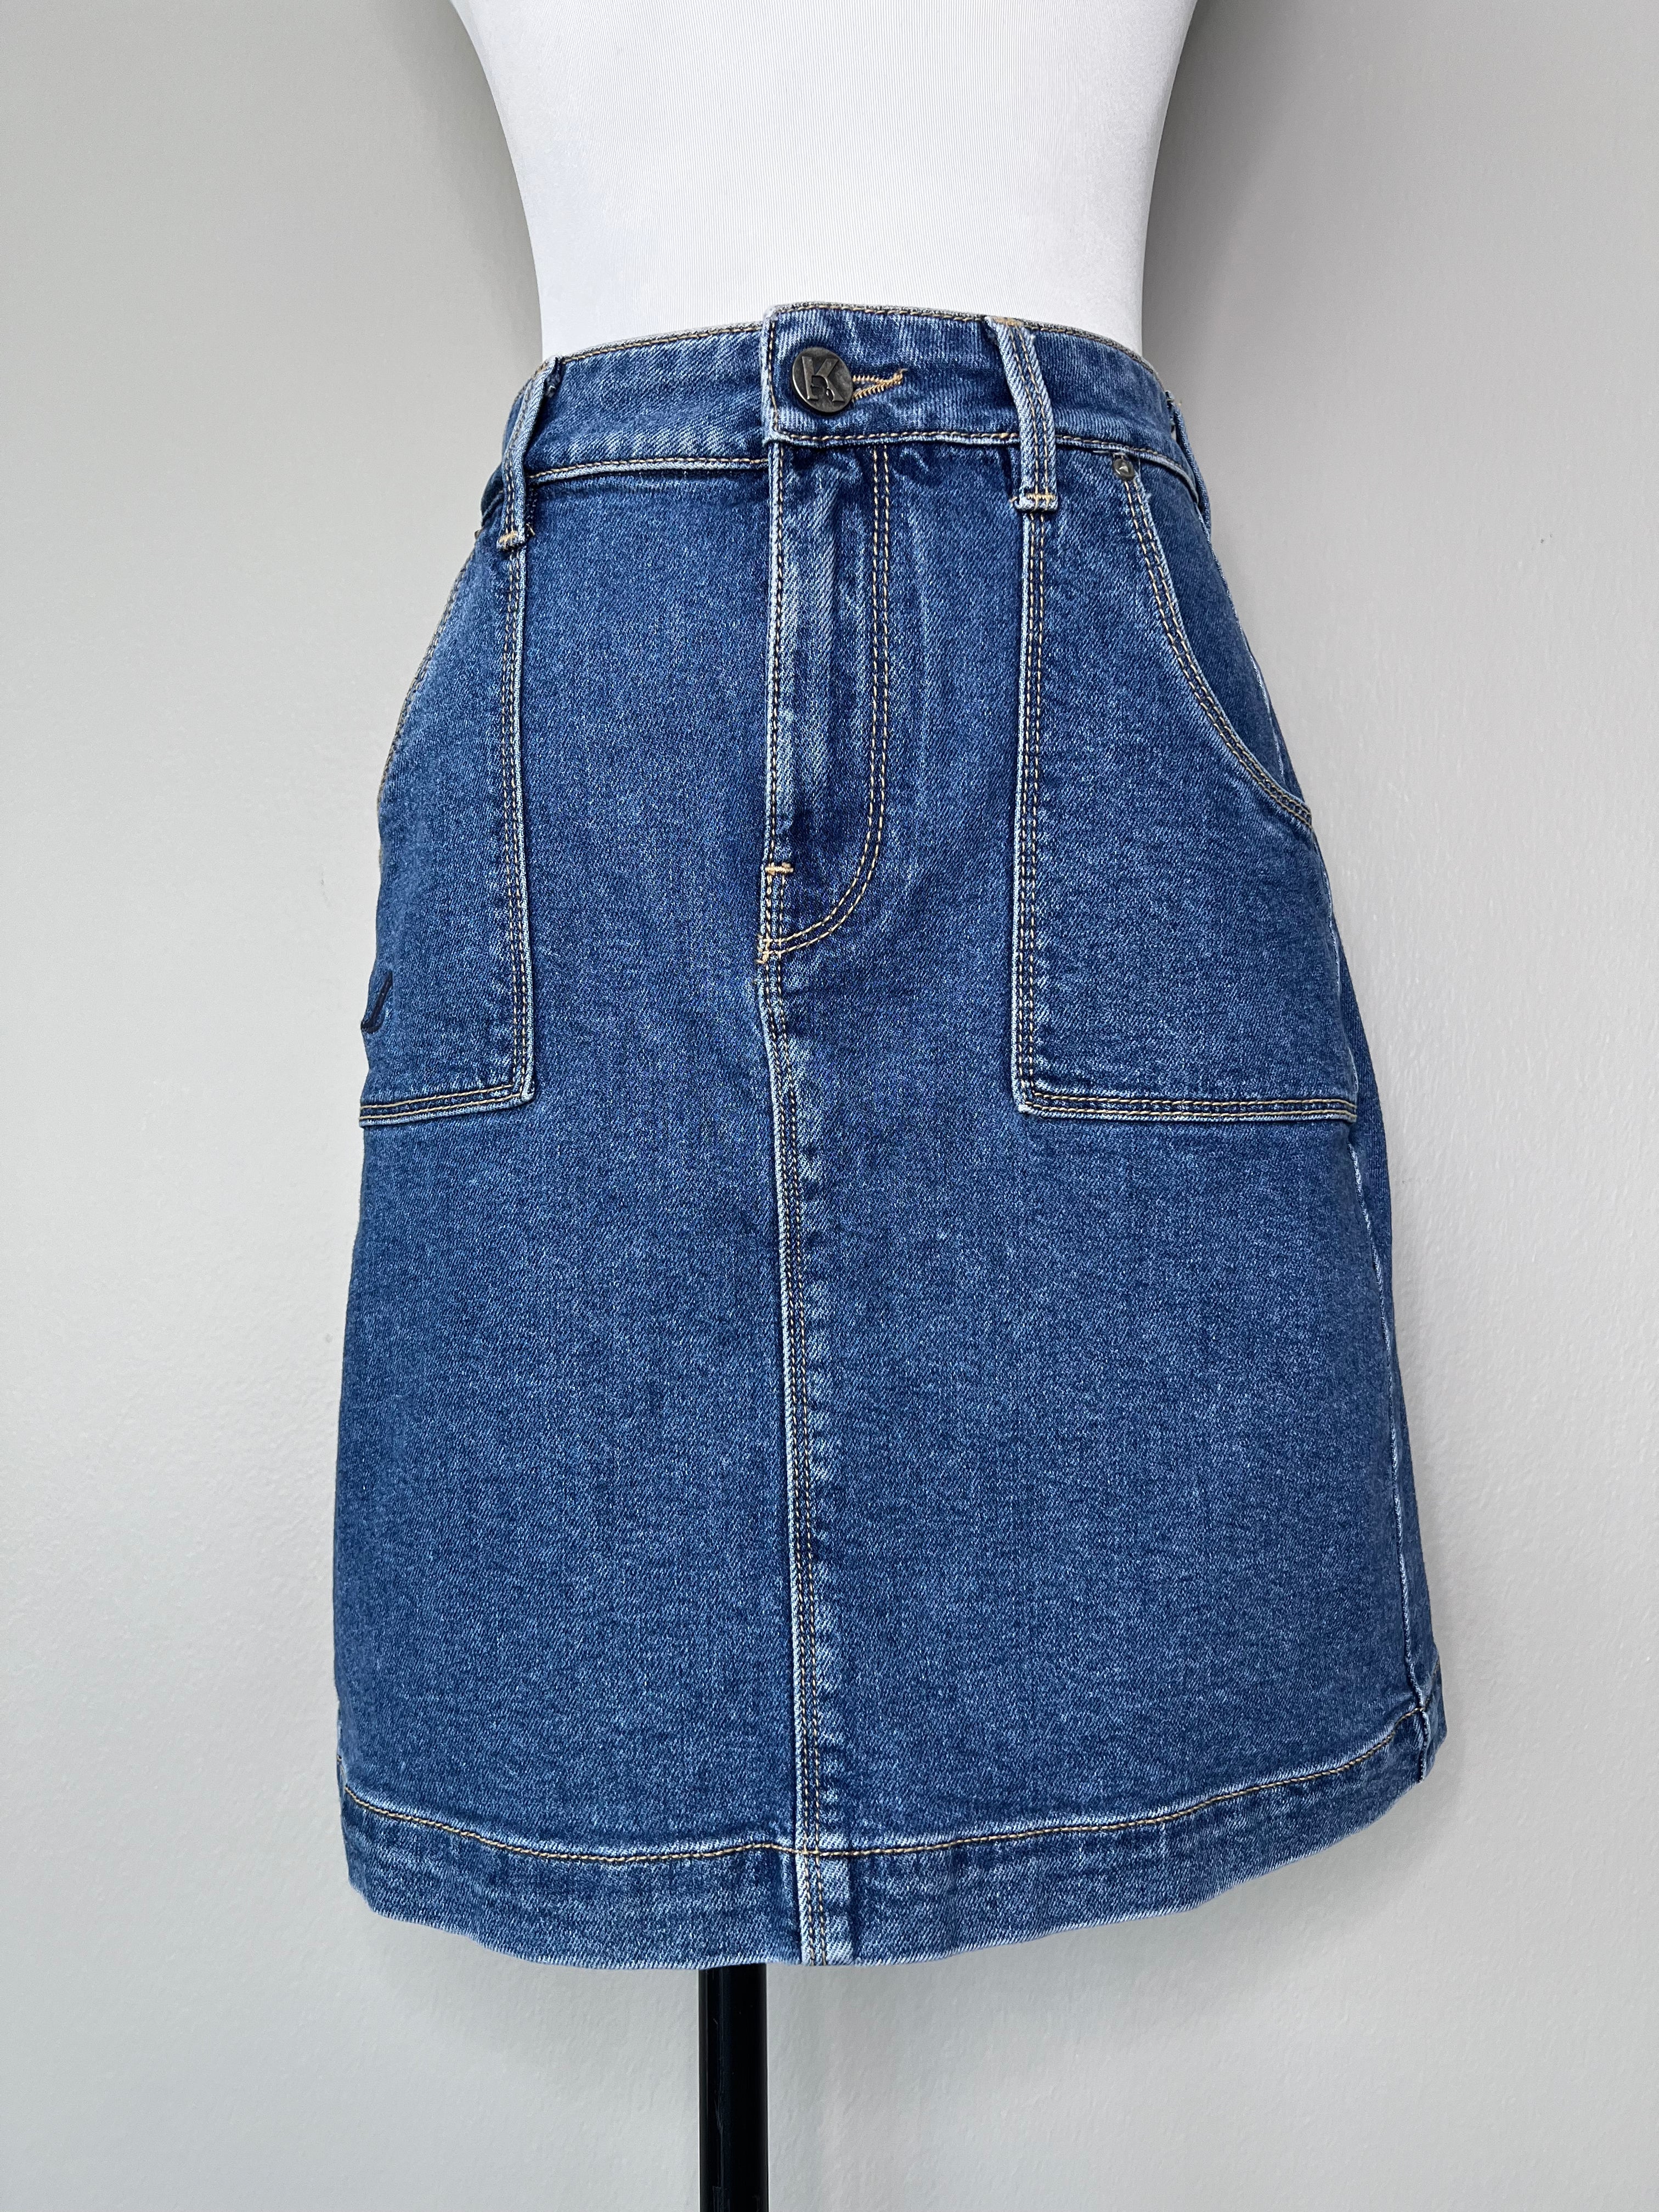 Blue short denim skirt with pockets on either side at the front and back, and brand logo at the back pocket.- KARL LAGERFELD DENIM